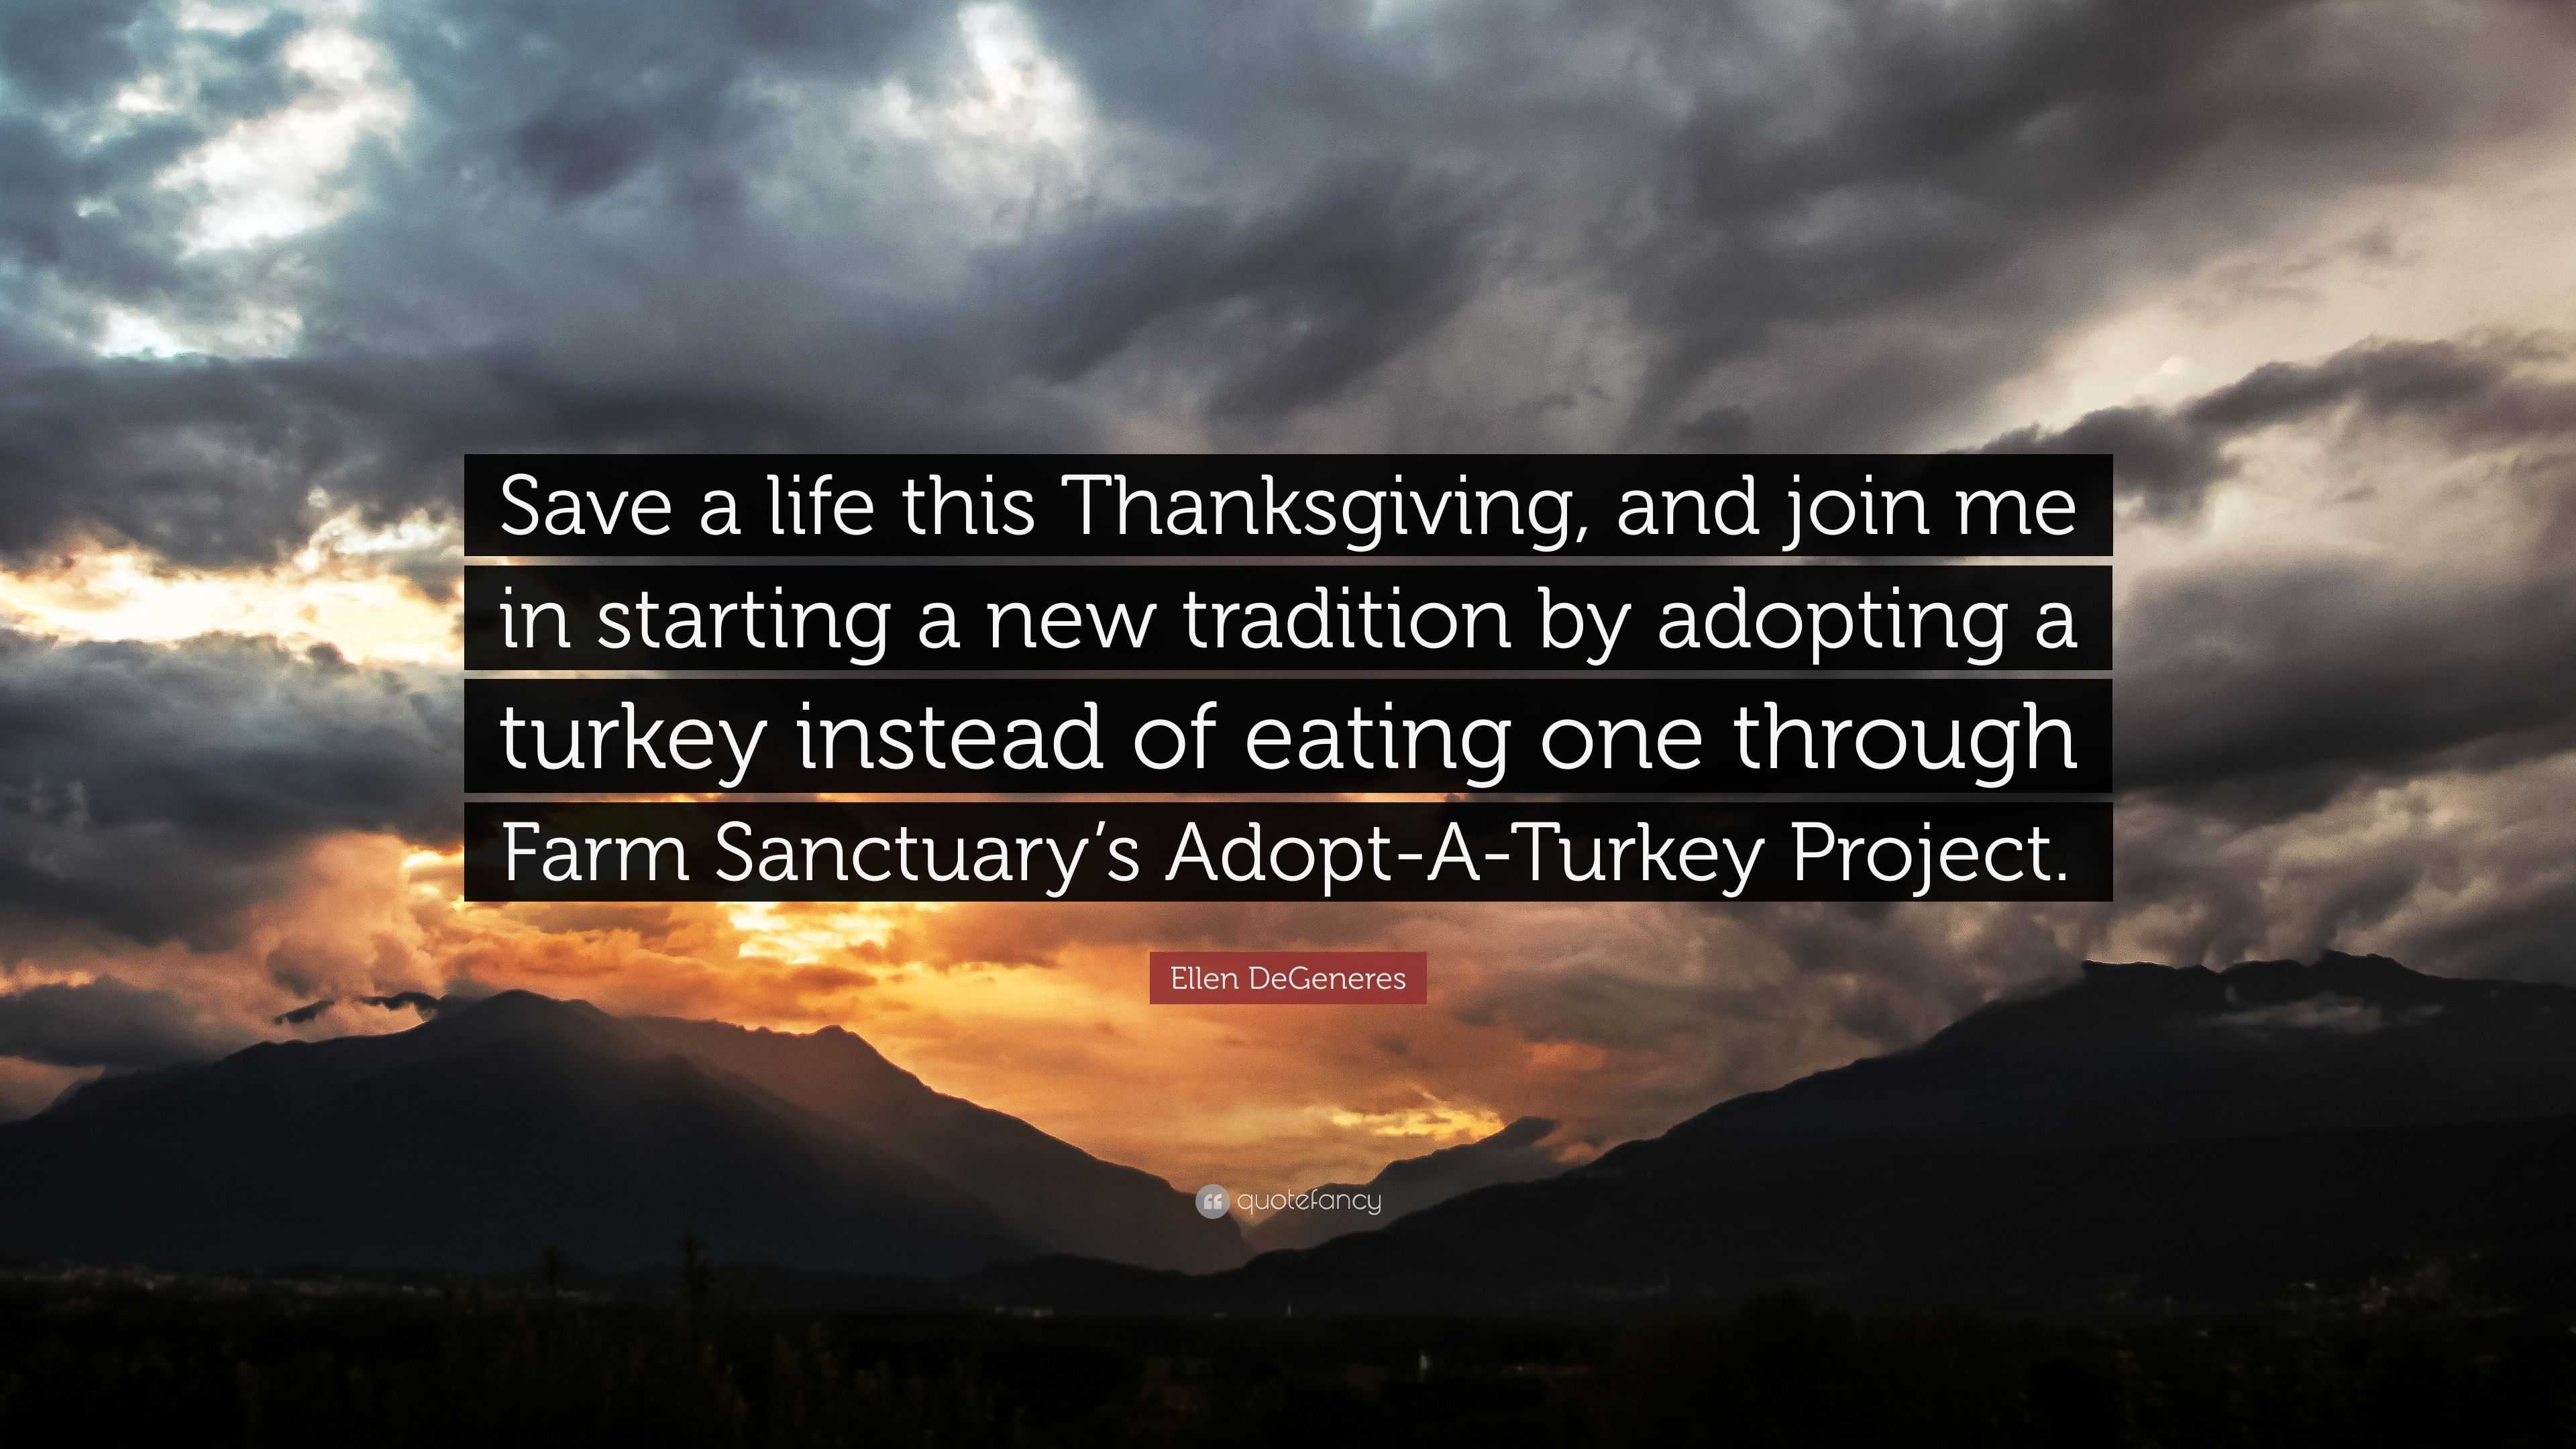 Ellen DeGeneres Quote “Save a life this Thanksgiving and join me in starting